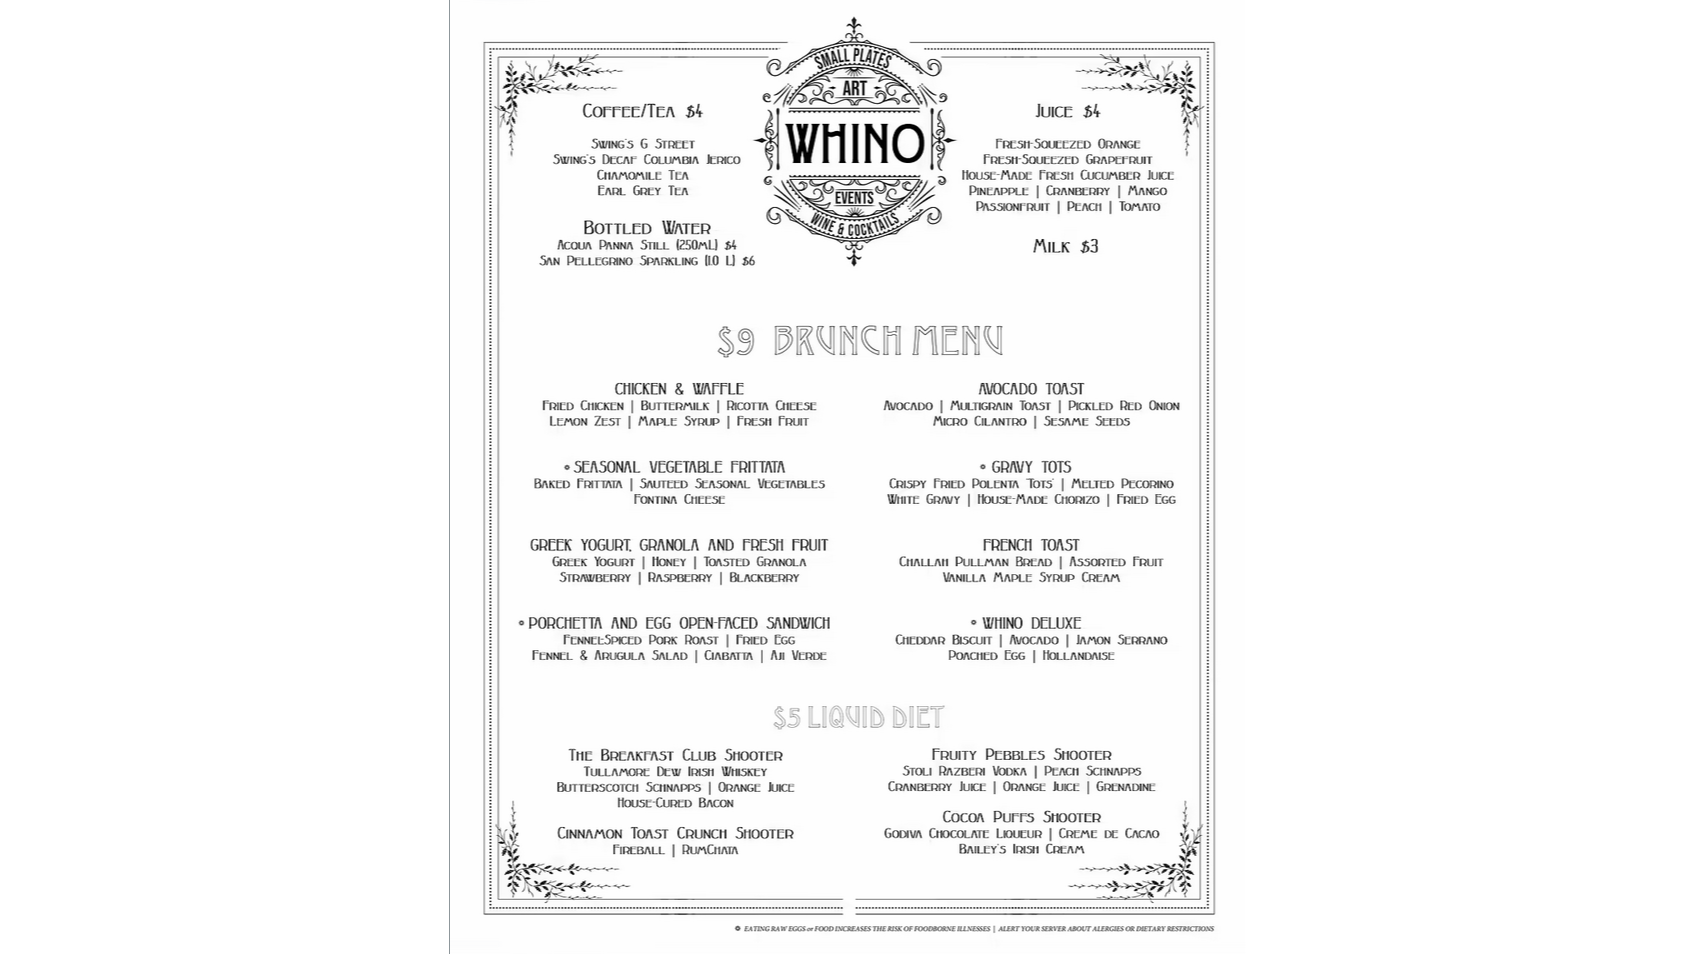 Photo for South Beach Saturday Brunch by DCBX & Whino on ViewStub